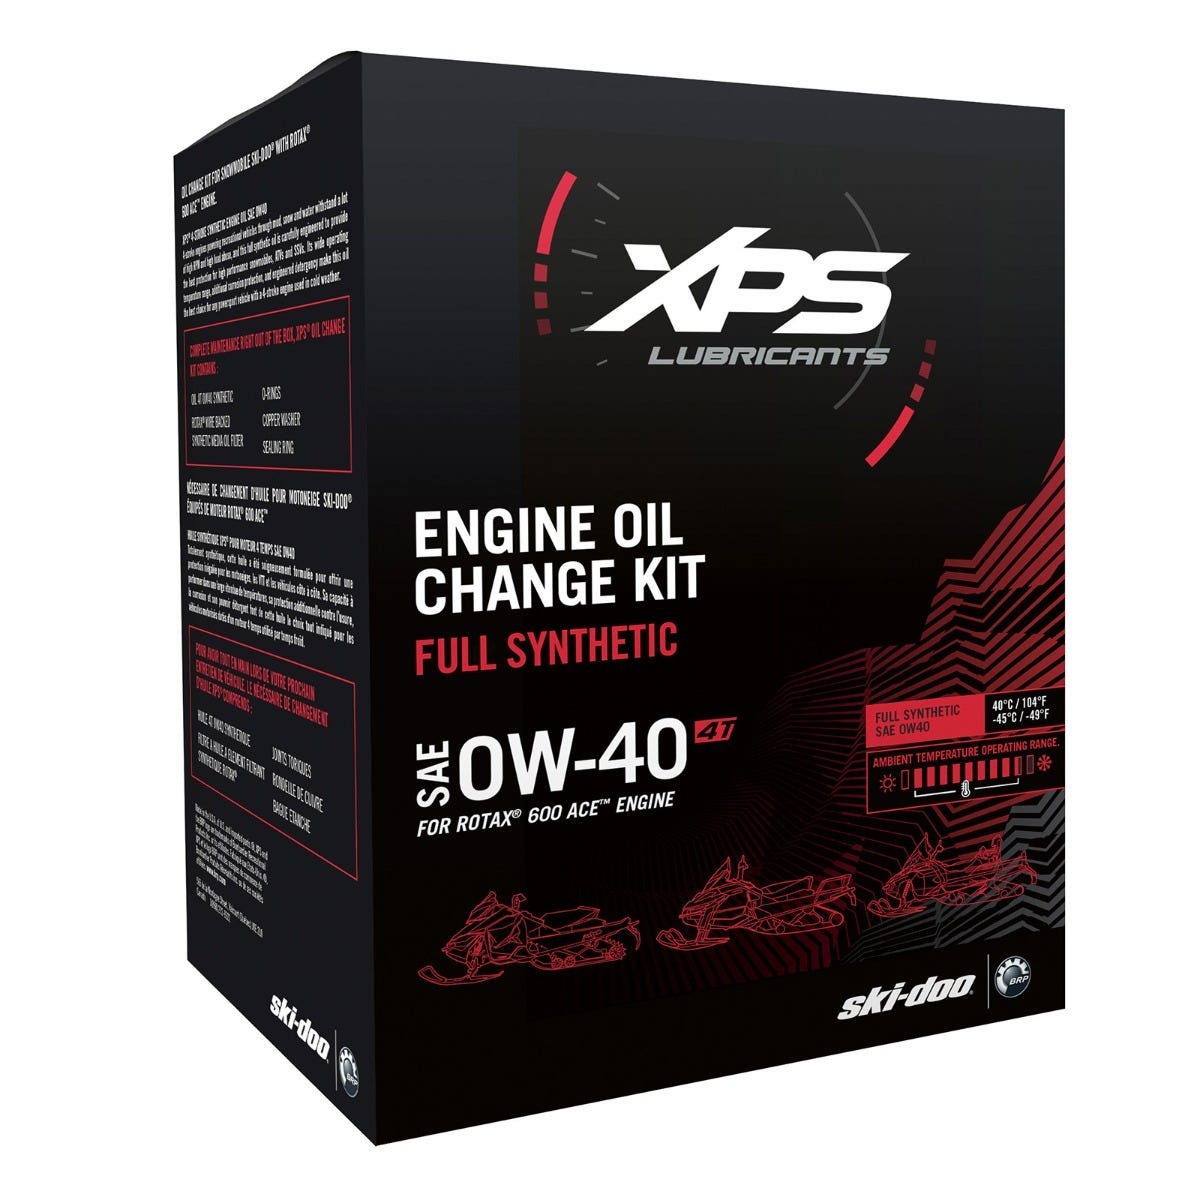 4T 0W-40 Synthetic Oil Change Kit for Rotax 1200 4-TEC engine - 779255 - The Parts Lodge